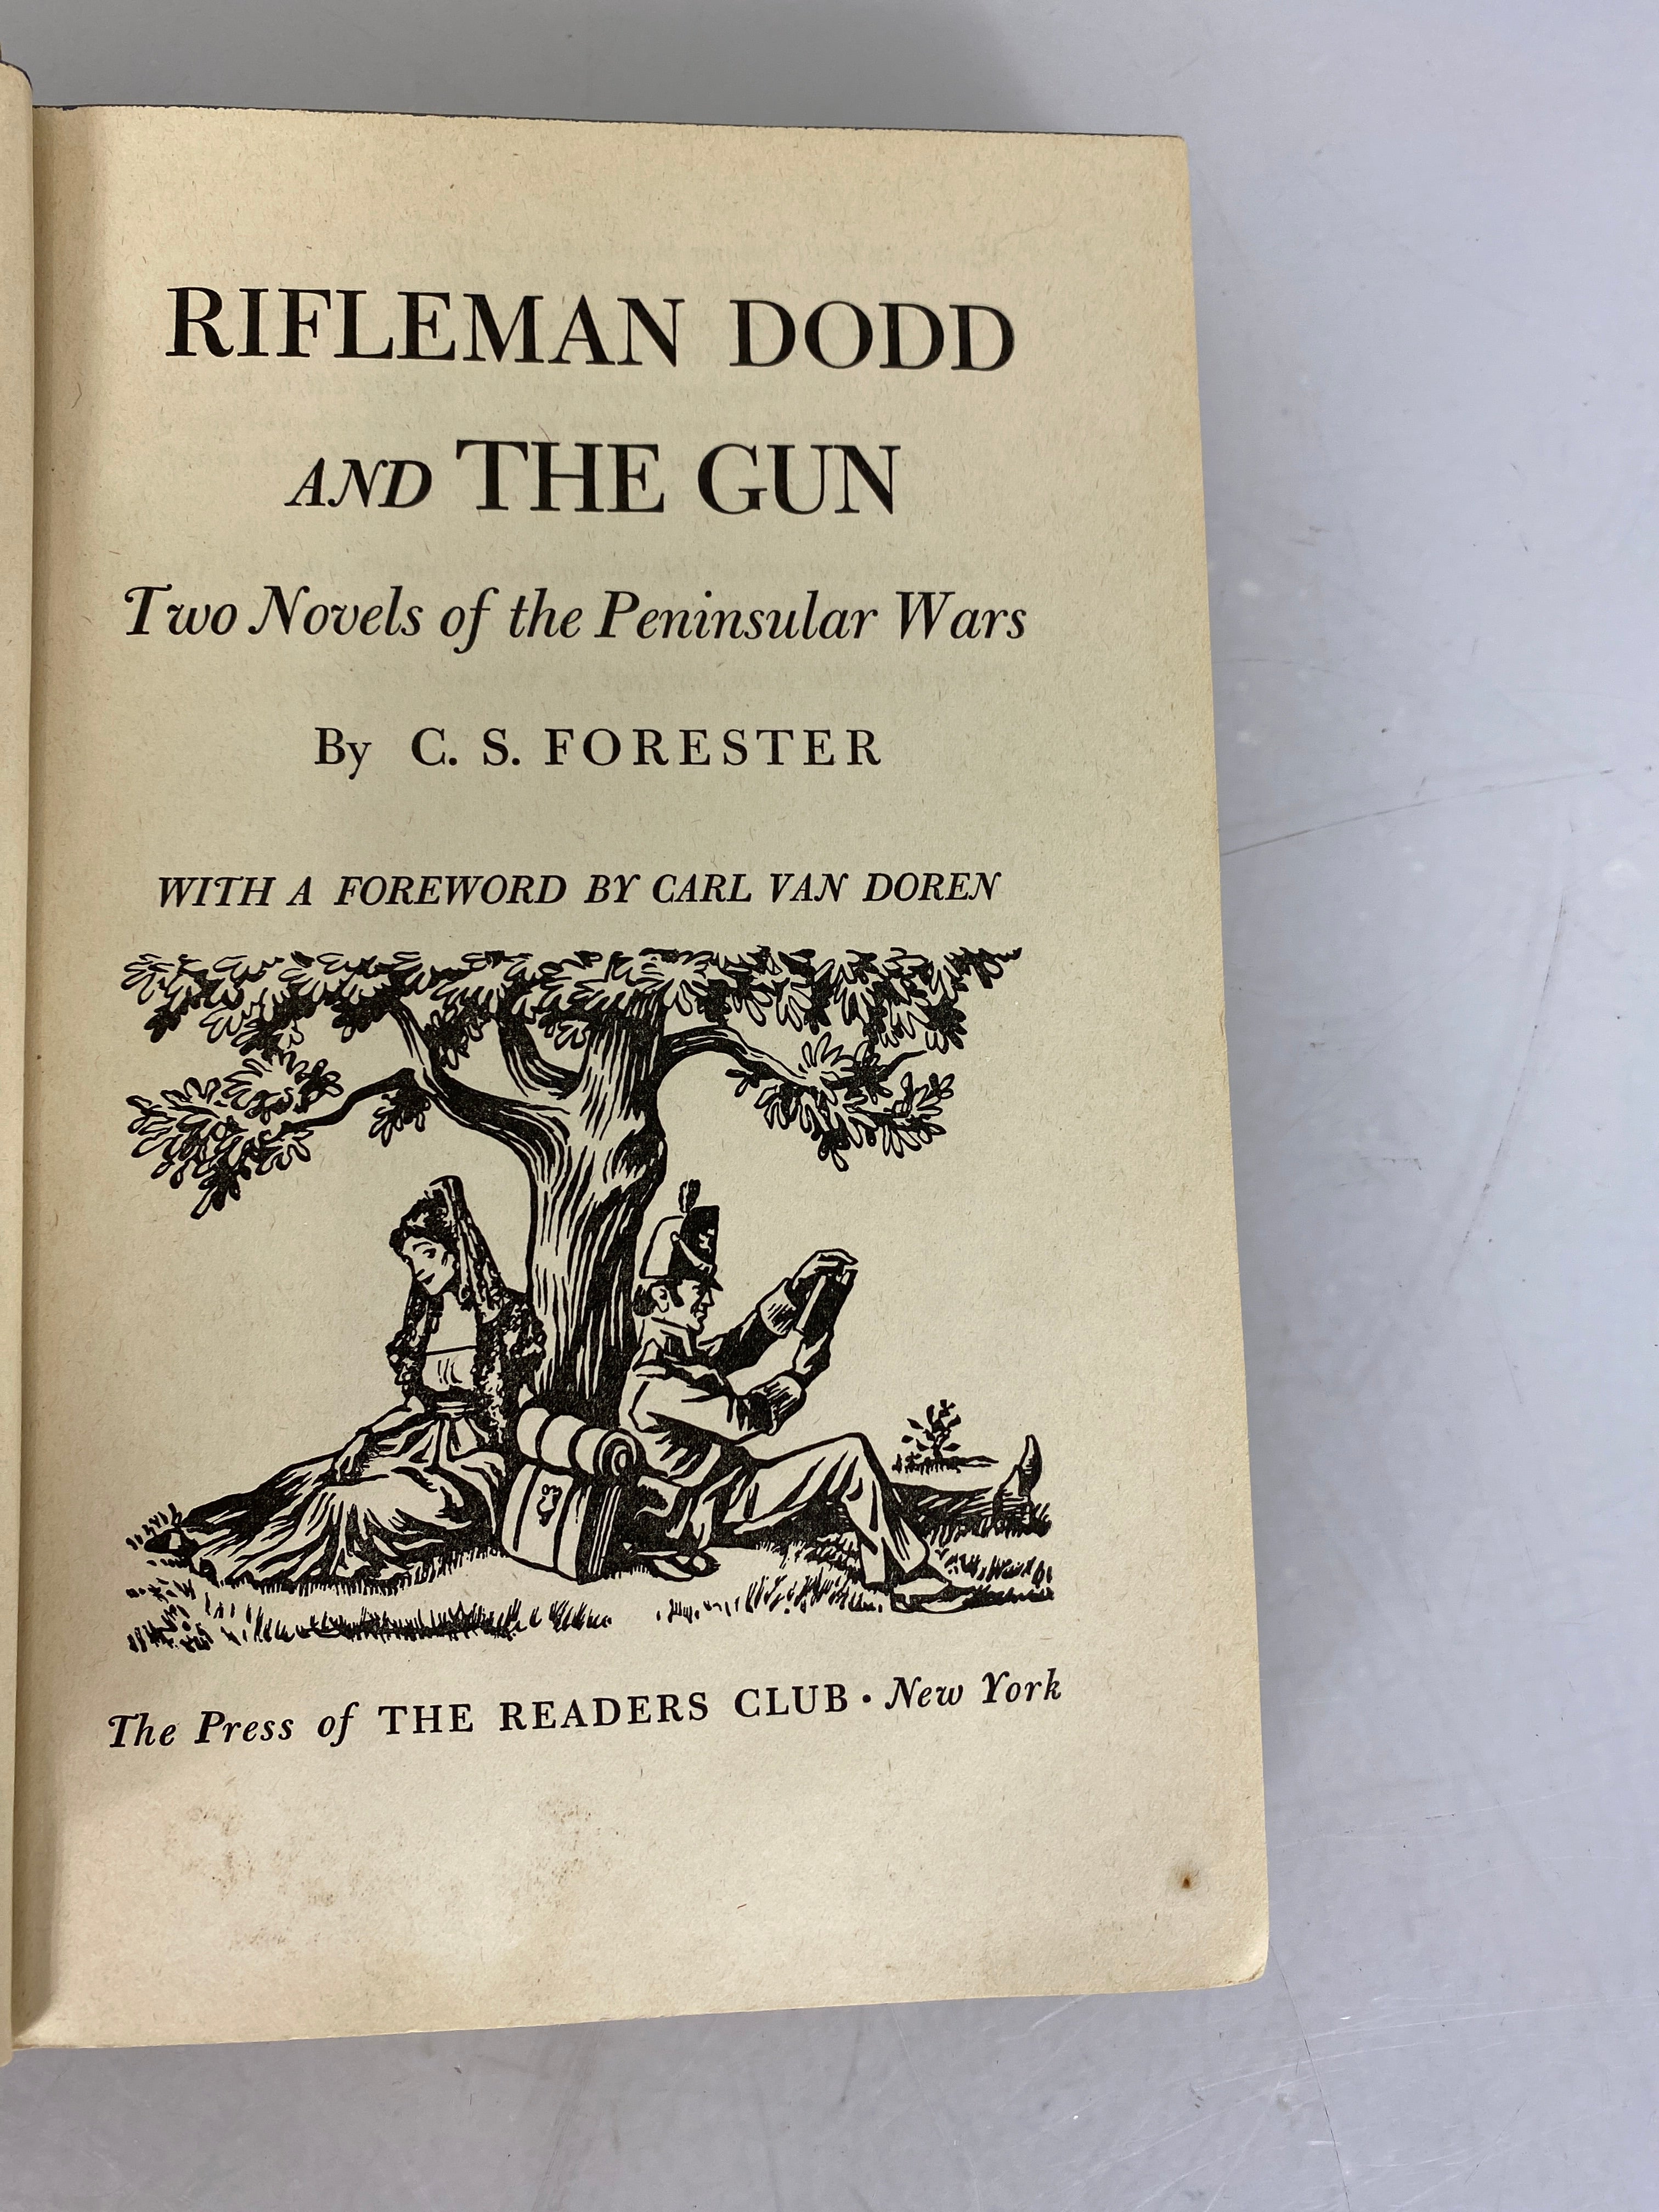 Rifleman Dodd and The Gun by C.S. Forester 1942 HC